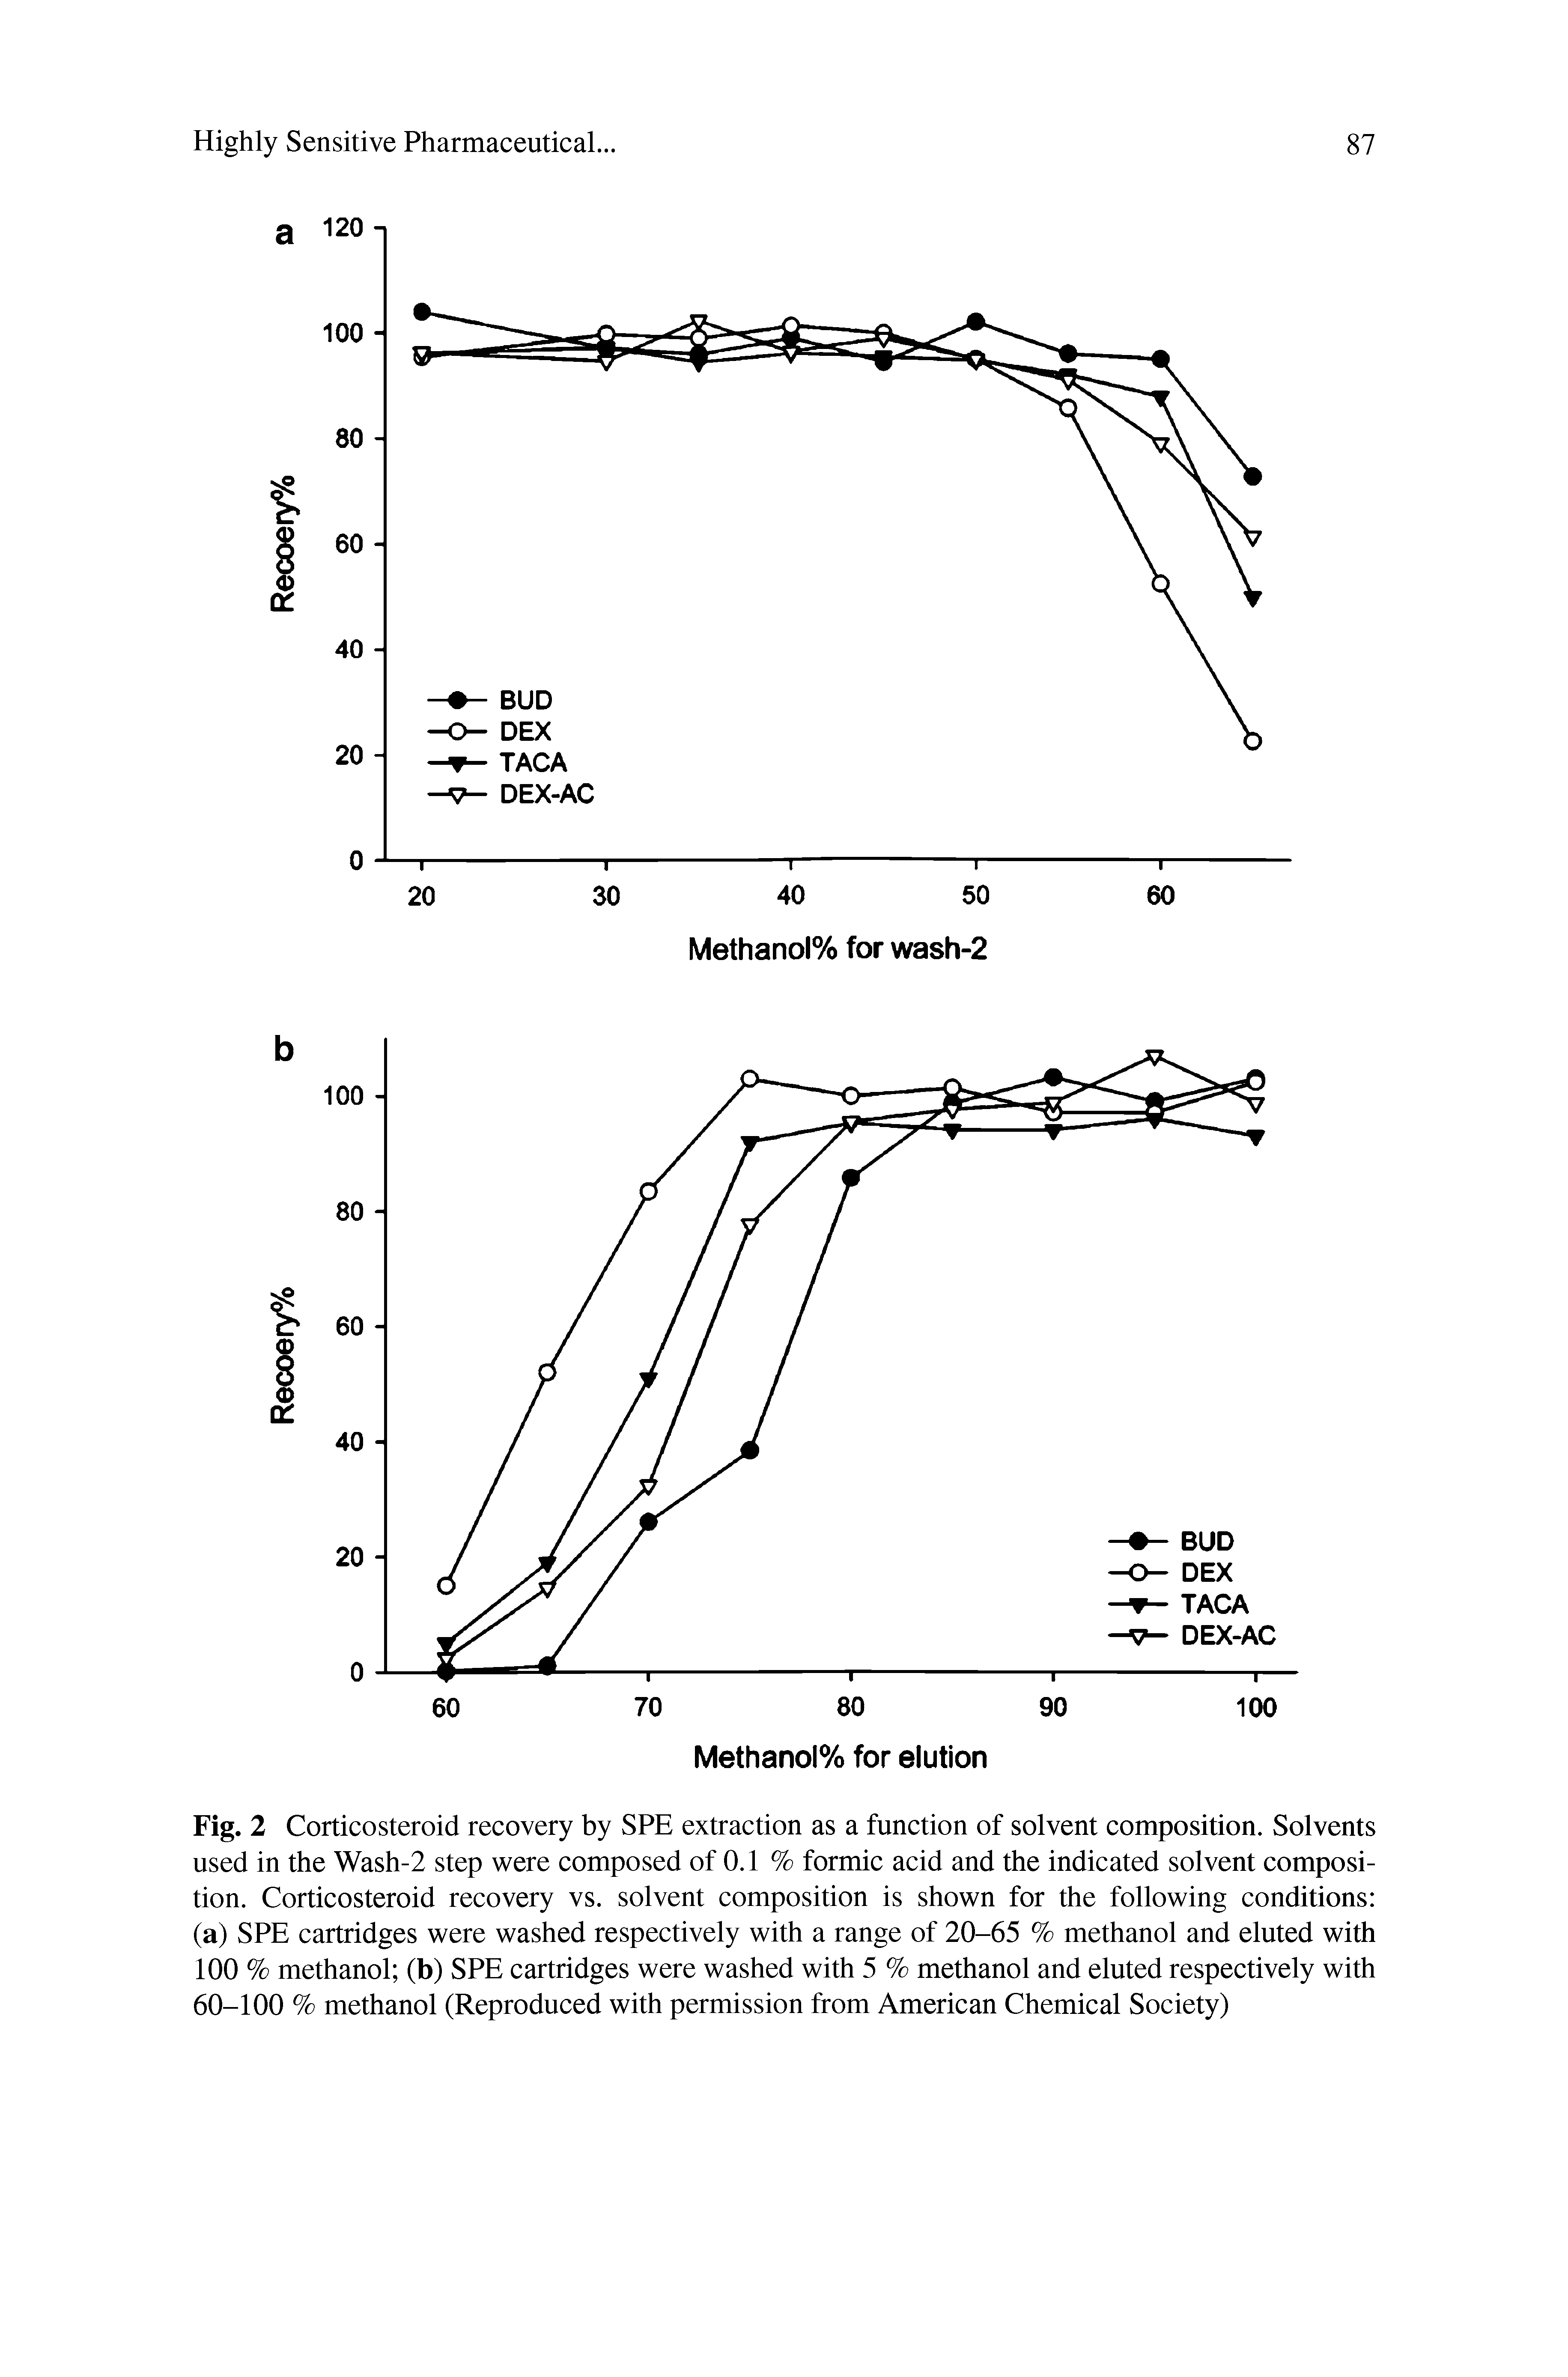 Fig. 2 Corticosteroid recovery by SPE extraction as a function of solvent composition. Solvents used in the Wash-2 step were composed of 0.1 % formic acid and the indicated solvent composition. Corticosteroid recovery vs. solvent composition is shown for the following conditions (a) SPE cartridges were washed respectively with a range of 20-65 % methanol and eluted with 100 % methanol (b) SPE cartridges were washed with 5 % methanol and eluted respectively with 60-100 % methanol (Reproduced with permission from American Chemical Society)...